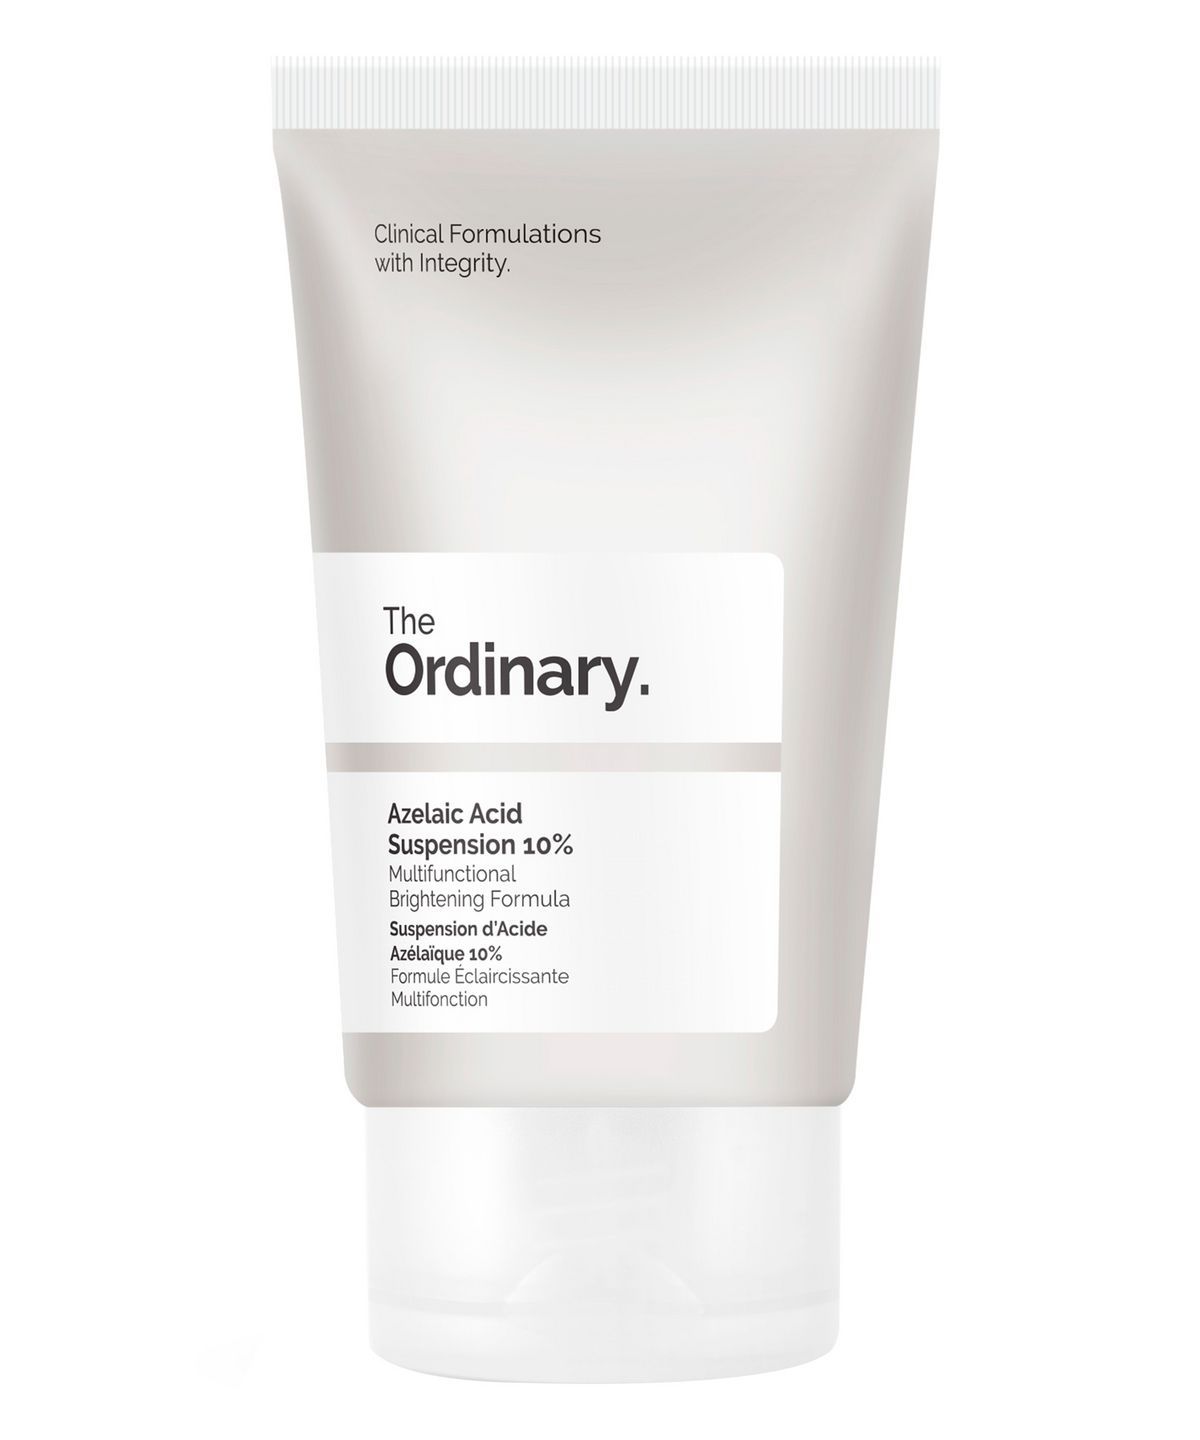 Azelaic Acid Suspension 10% by The Ordinary in UAE at Shopey.ae